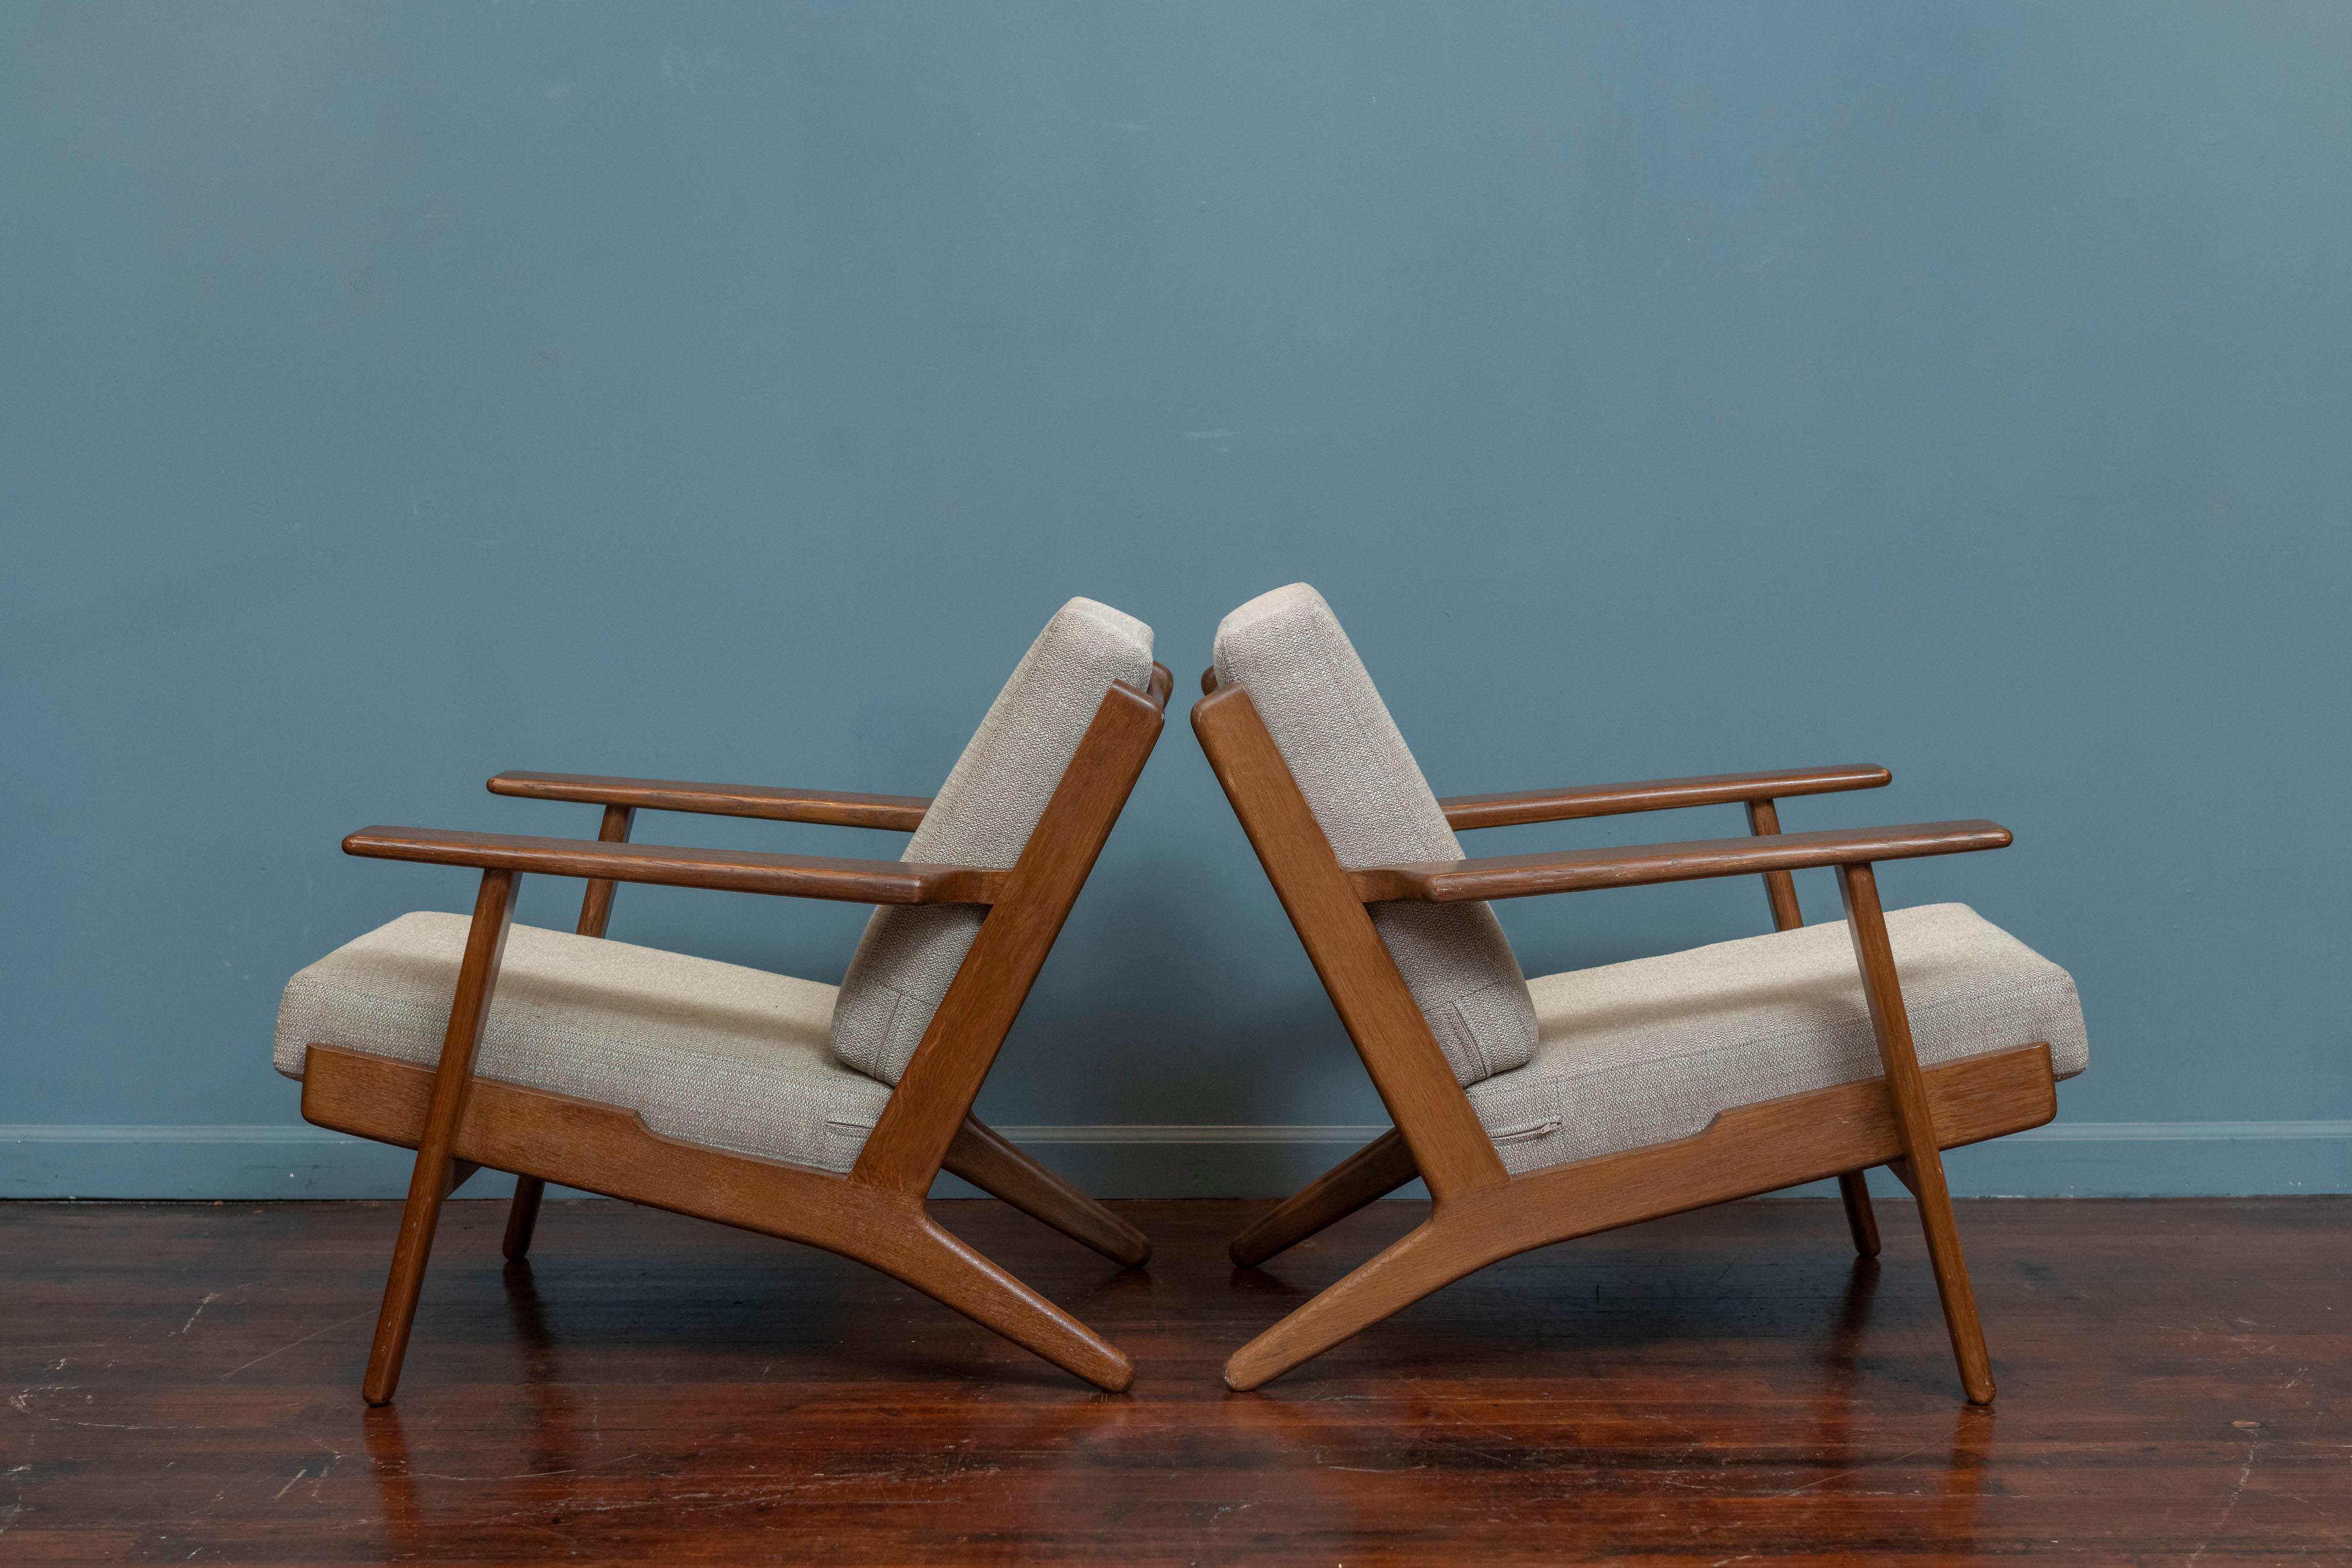 Hans Wegner design lounge chairs, Model GE 290 for Getama. Original matched pair of chairs in the 